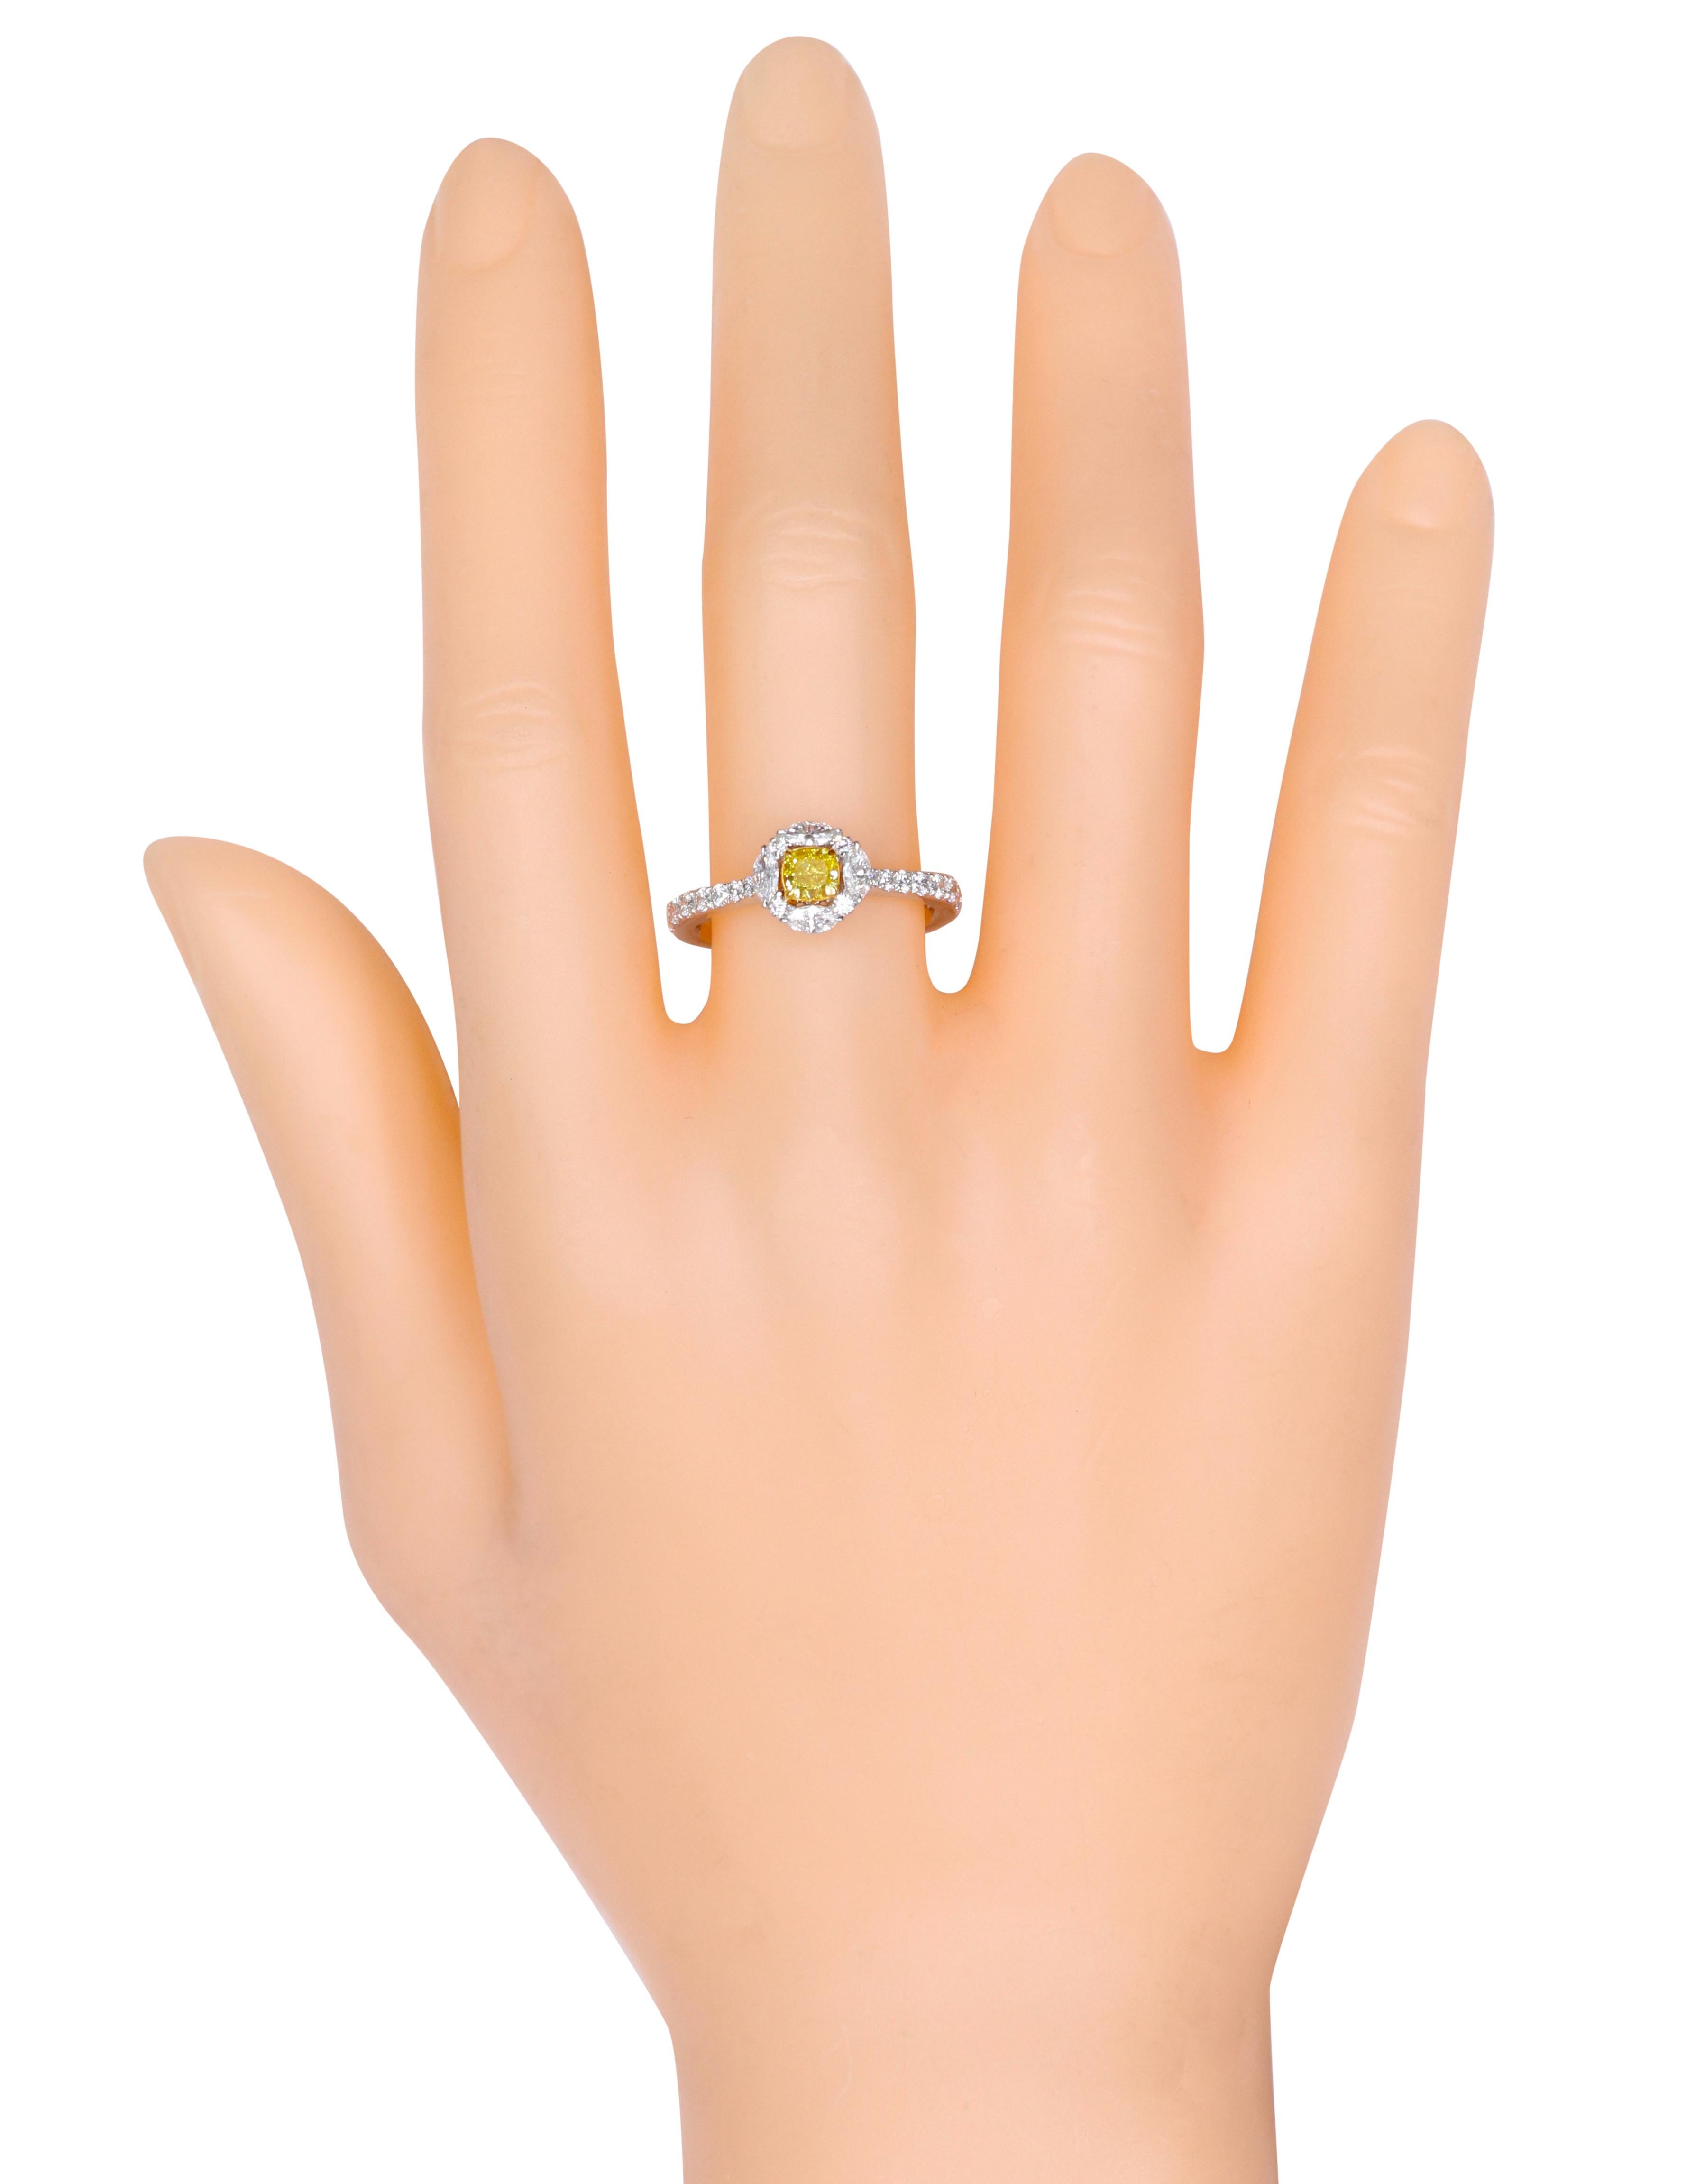 18 Karat Gold Solitaire Fancy Yellow and White Diamond Ring

Get ready to answer a lot of questions and bag amazing compliments as it’s your time to sparkle now. The ensembles we carry speaks a lot about our style but the pieces of jewelry we adorn